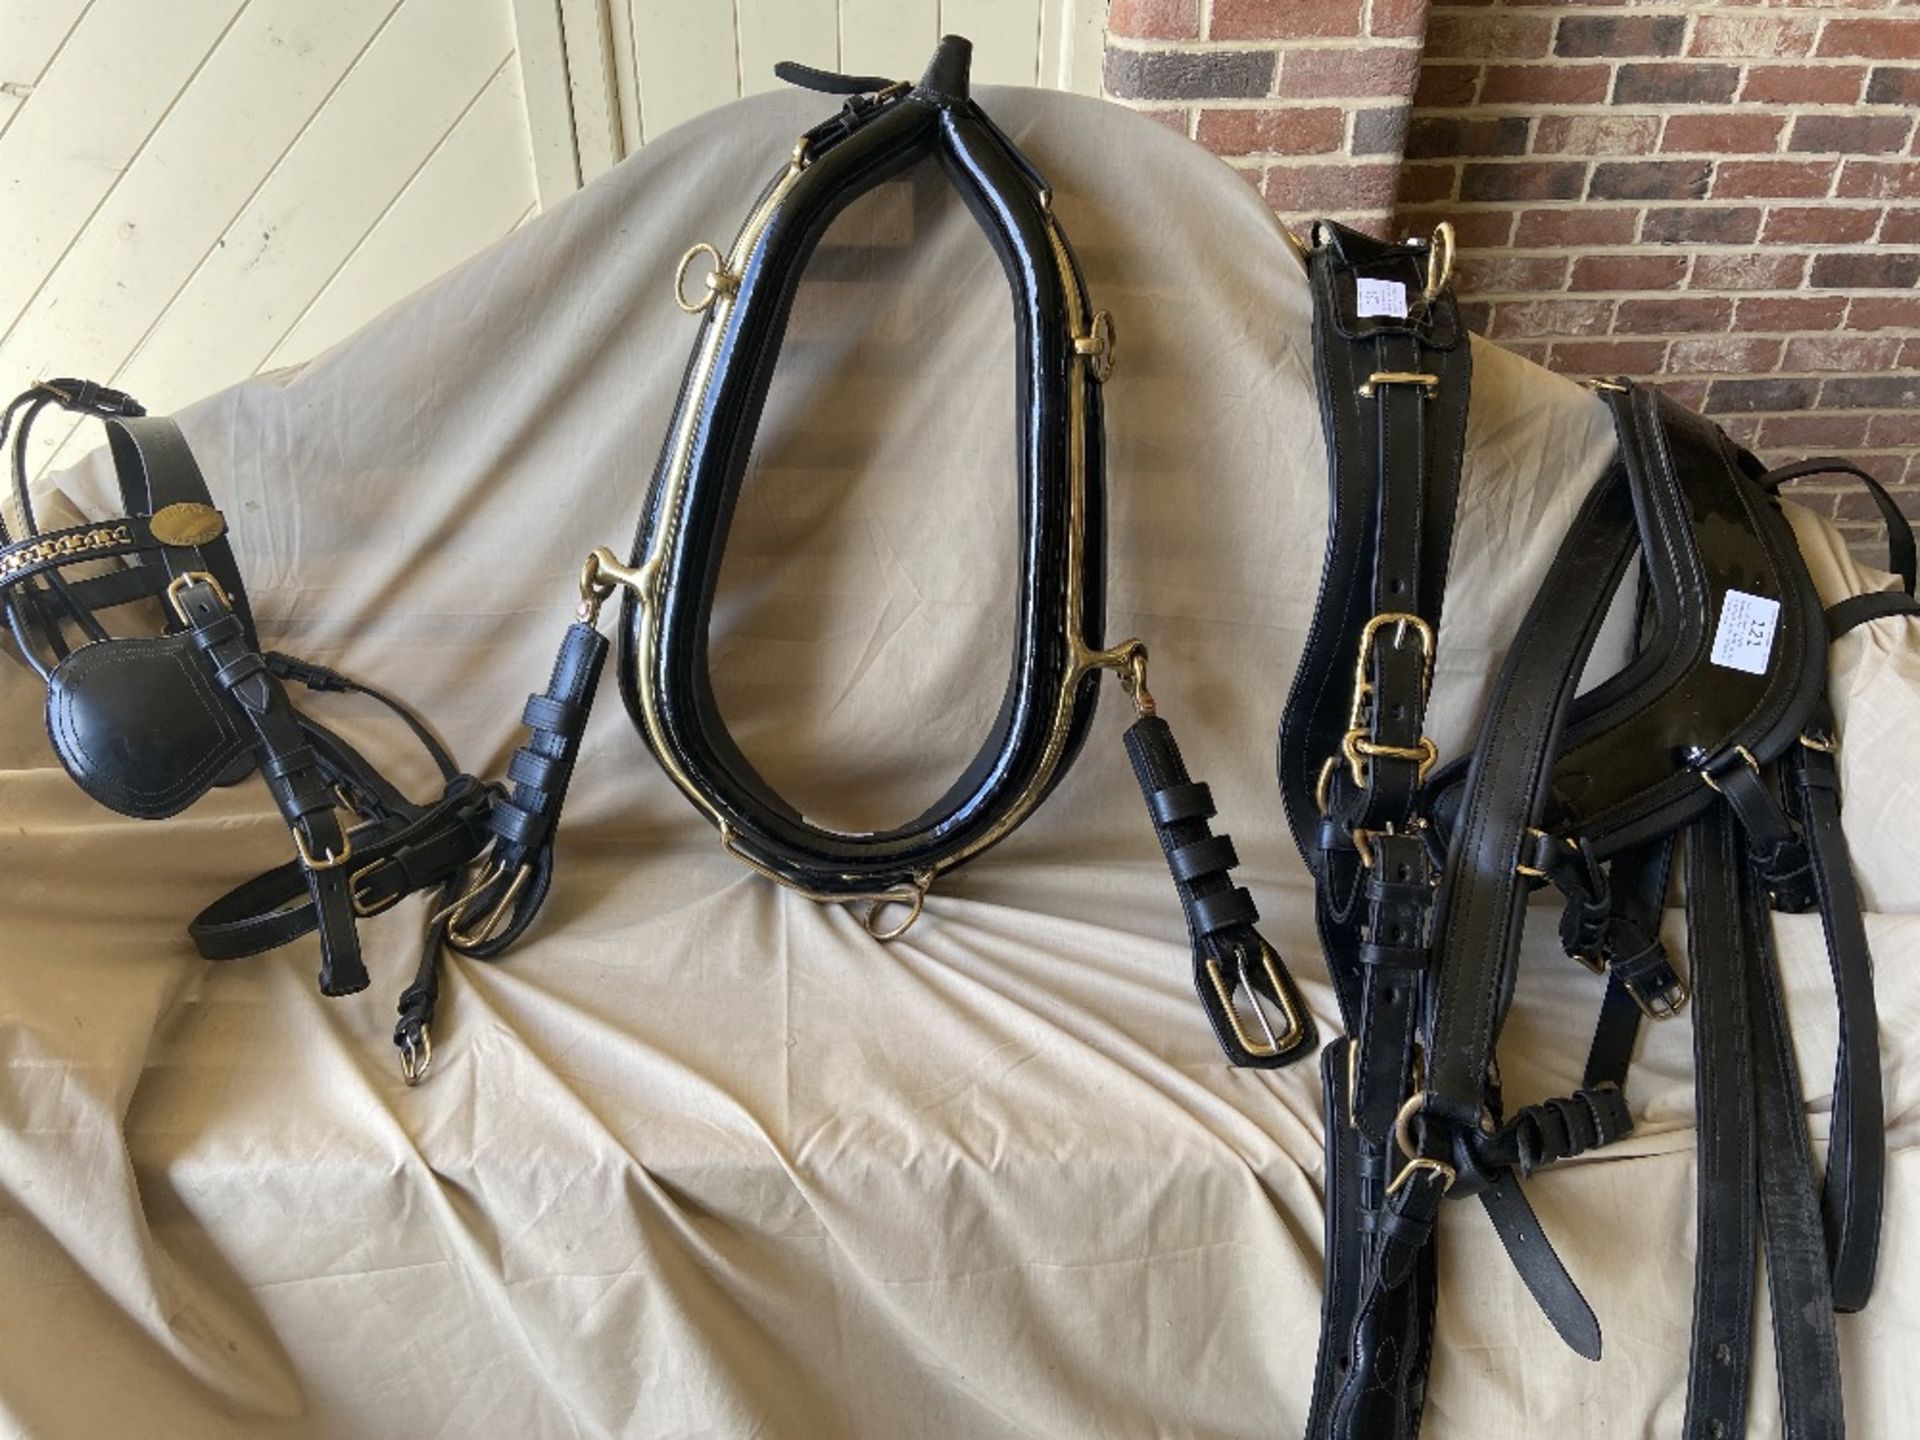 Set of new single harness by Ideal to fit cob/full size, 22ins x 10ins collar; new